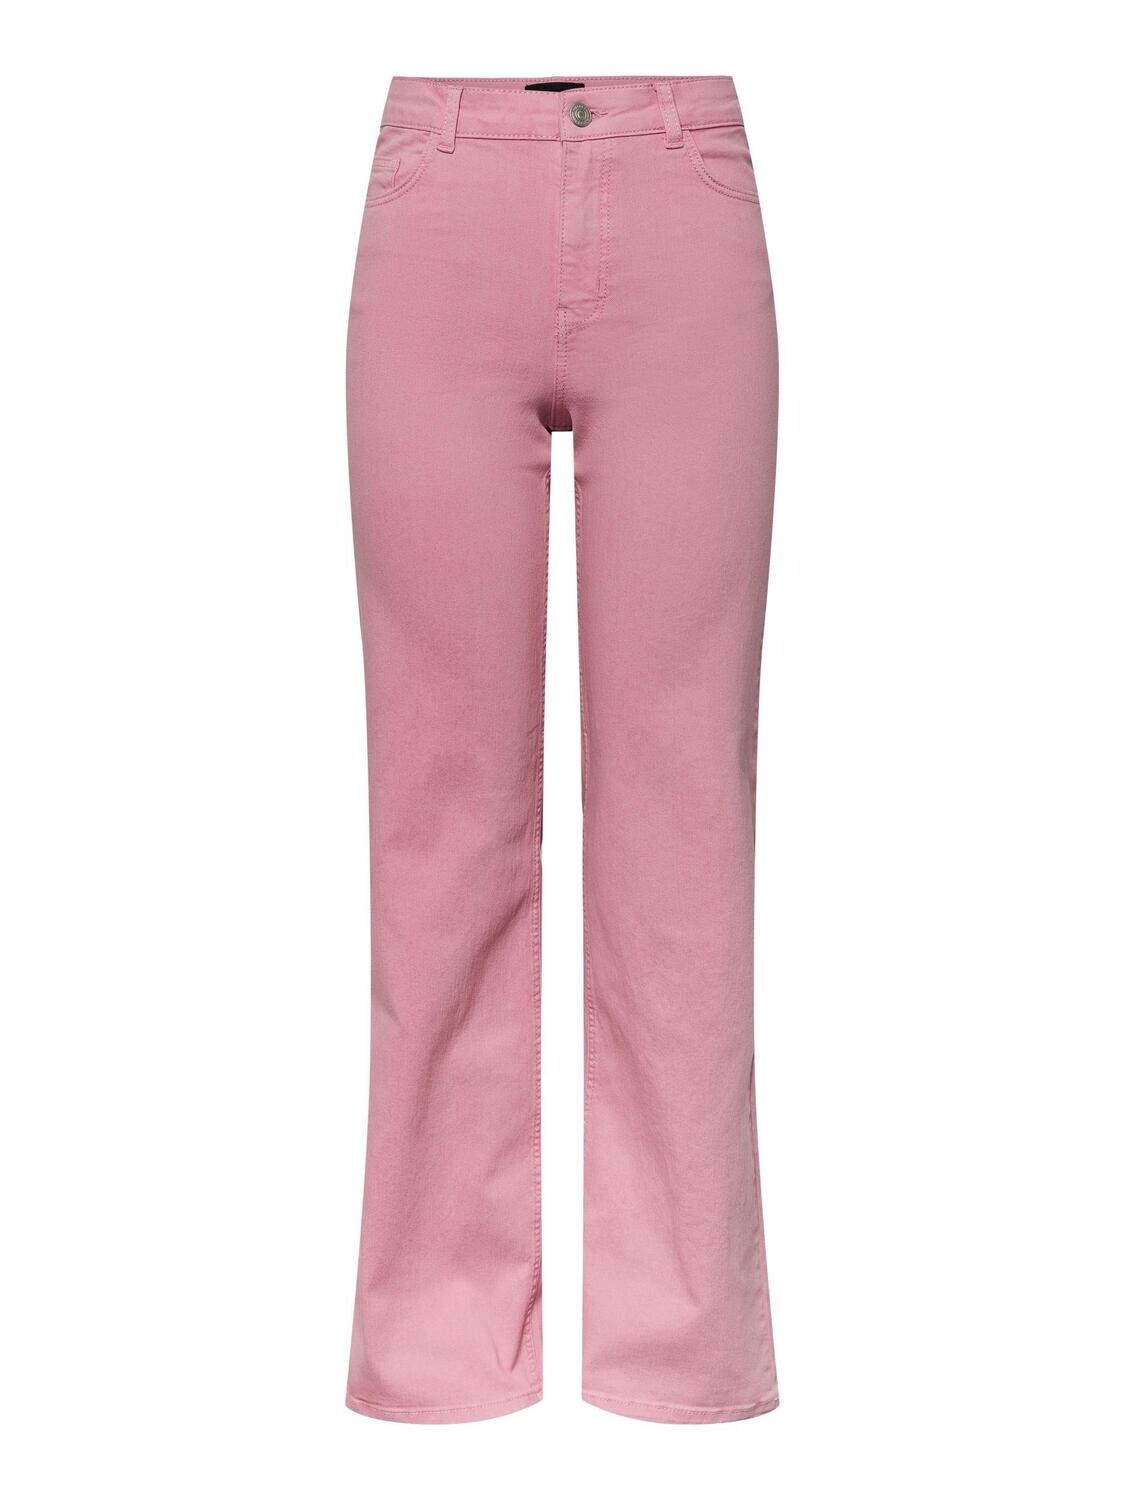 PCPEGGY HW WIDE PANT COLOUR NOOS BC Begonia Pink